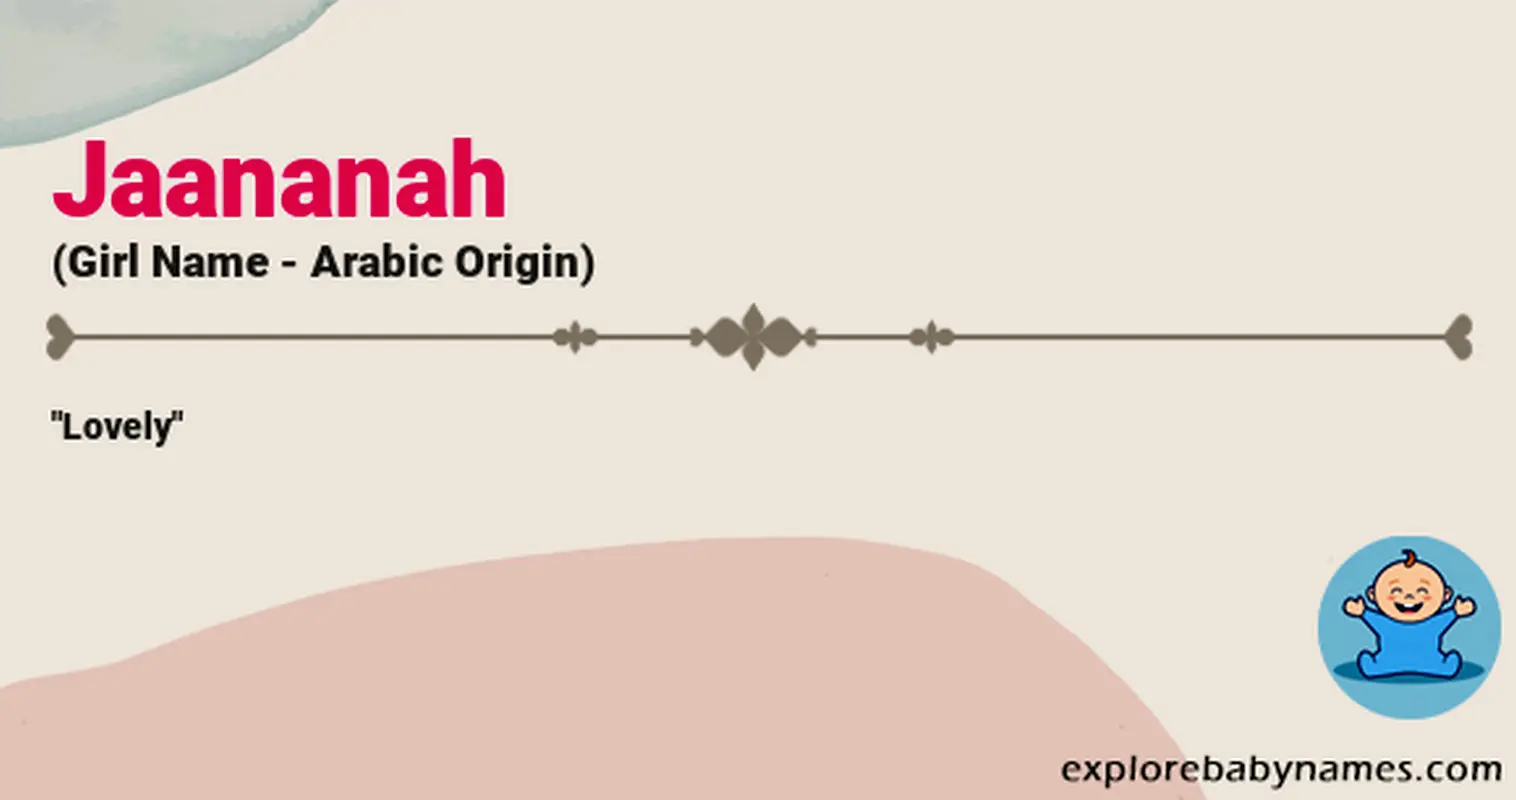 Meaning of Jaananah